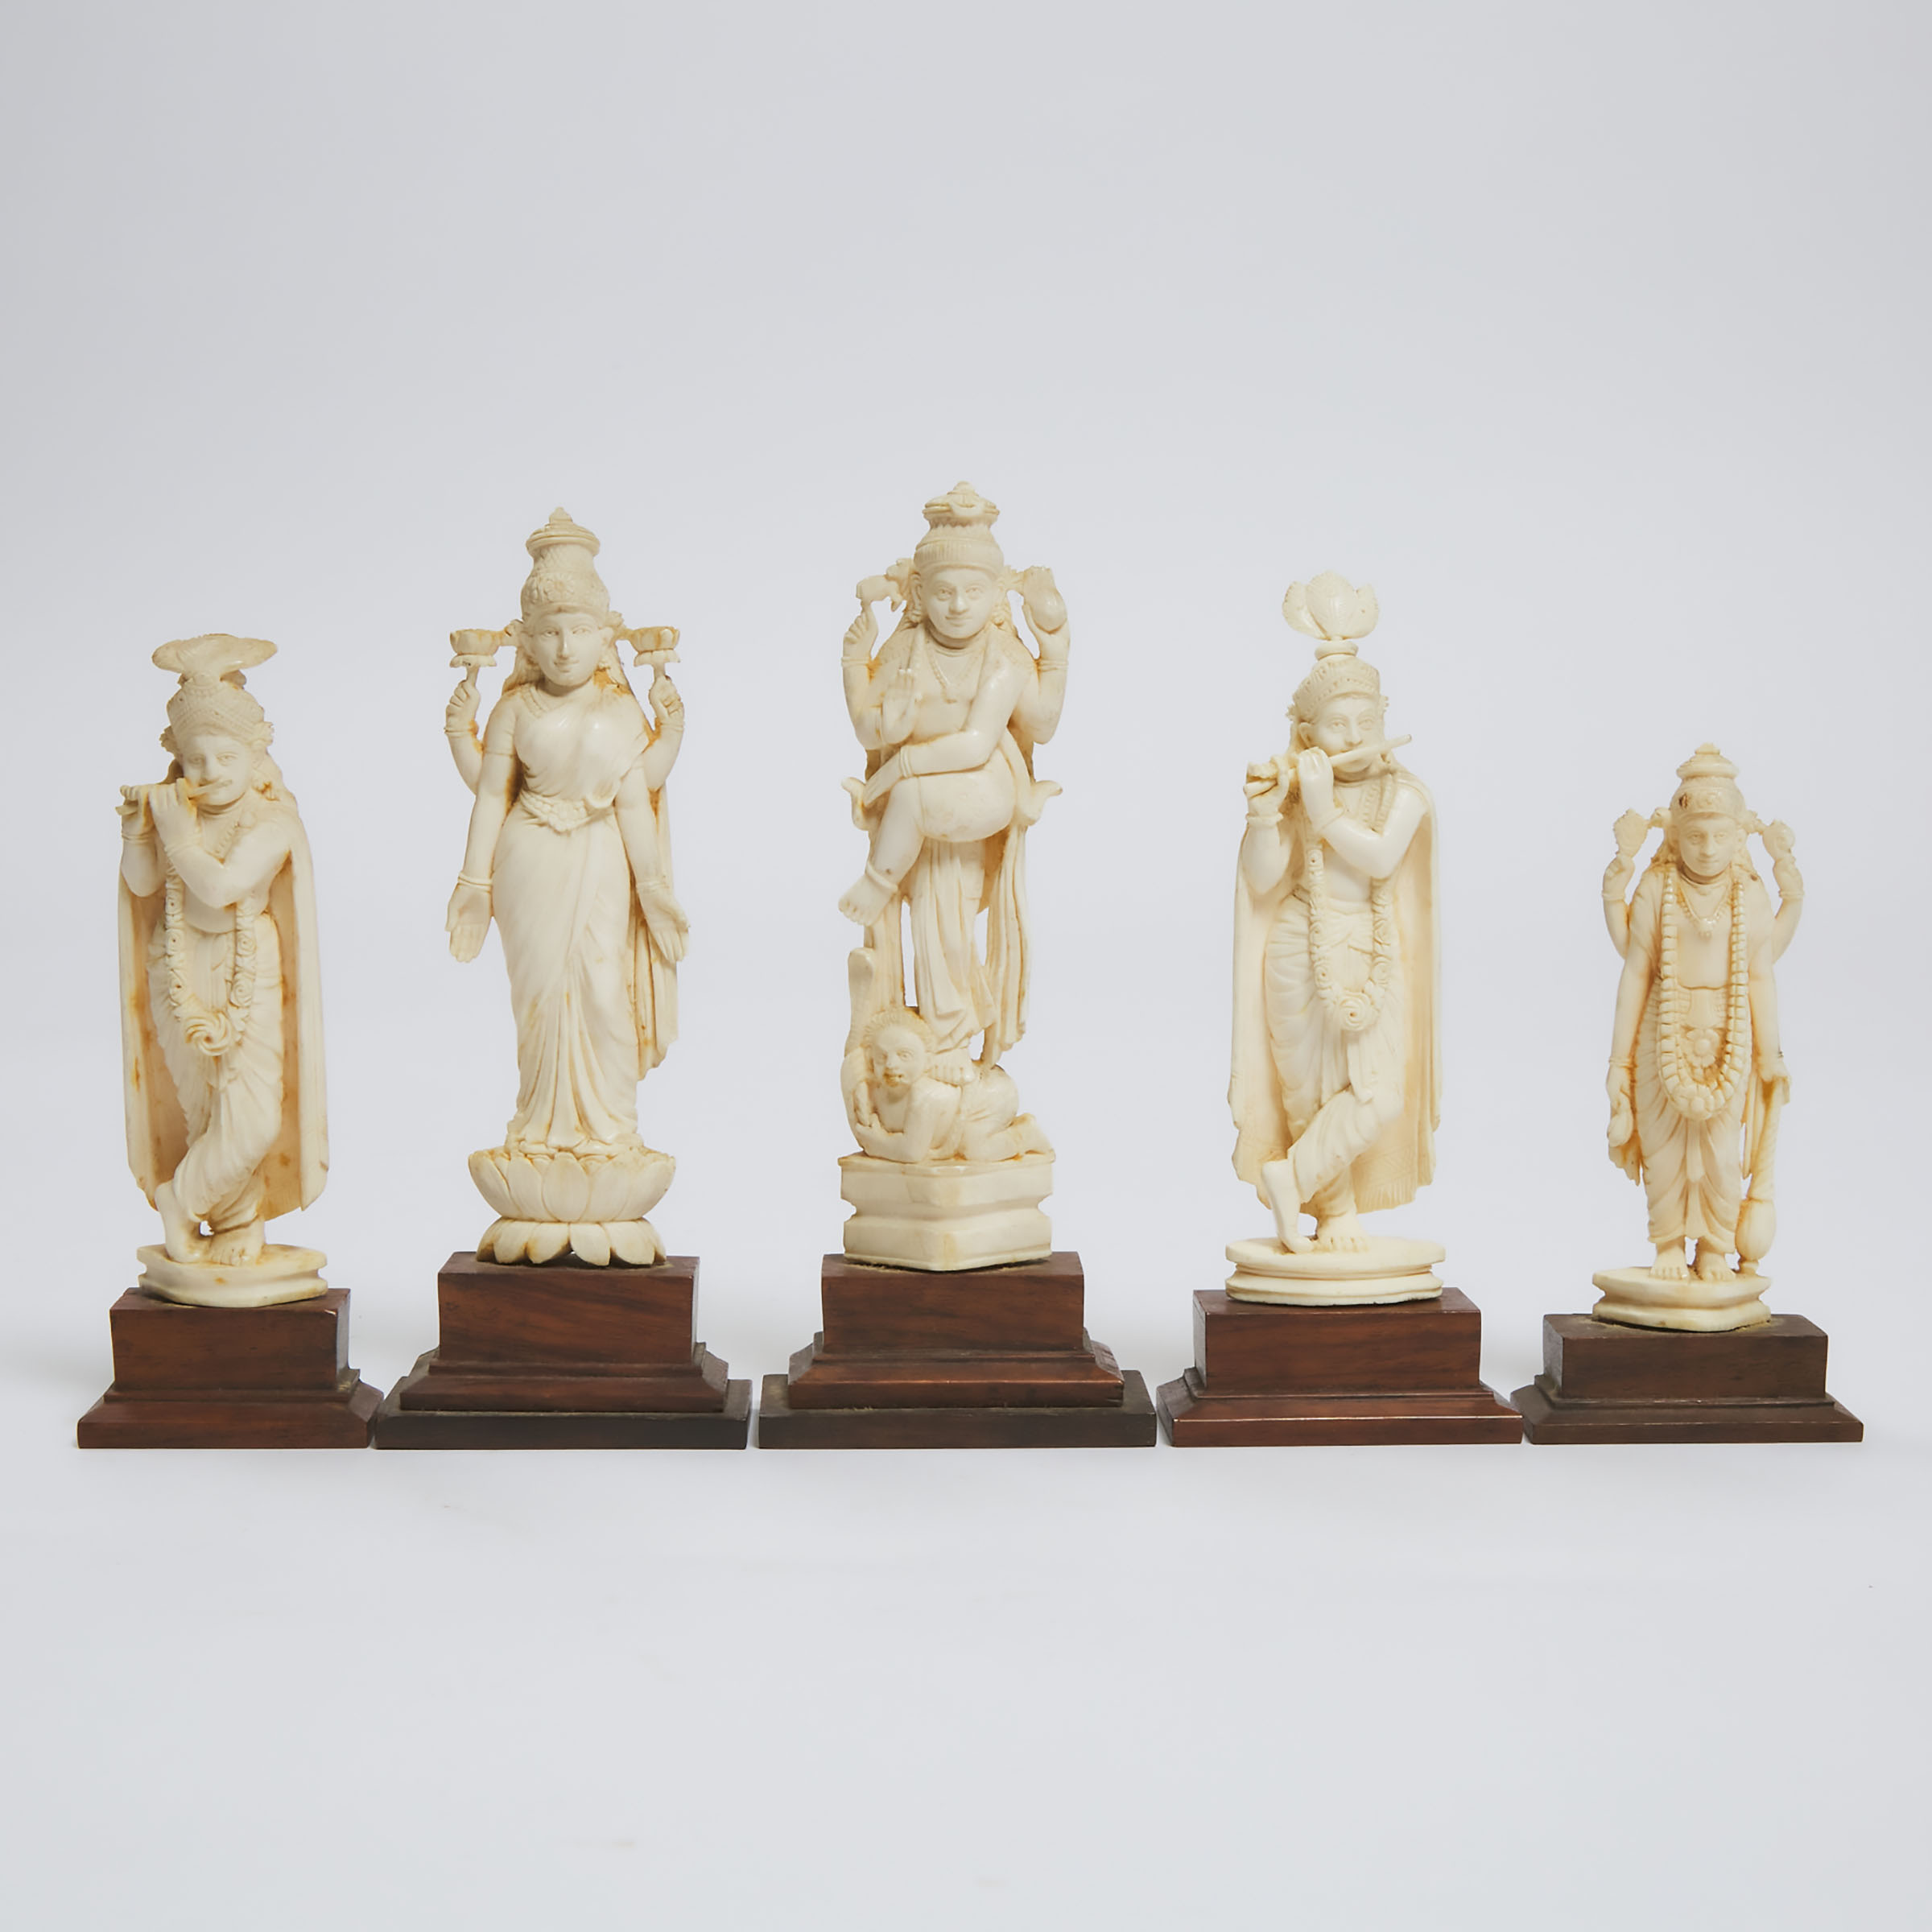 A Group of Five Indian Ivory Figures,